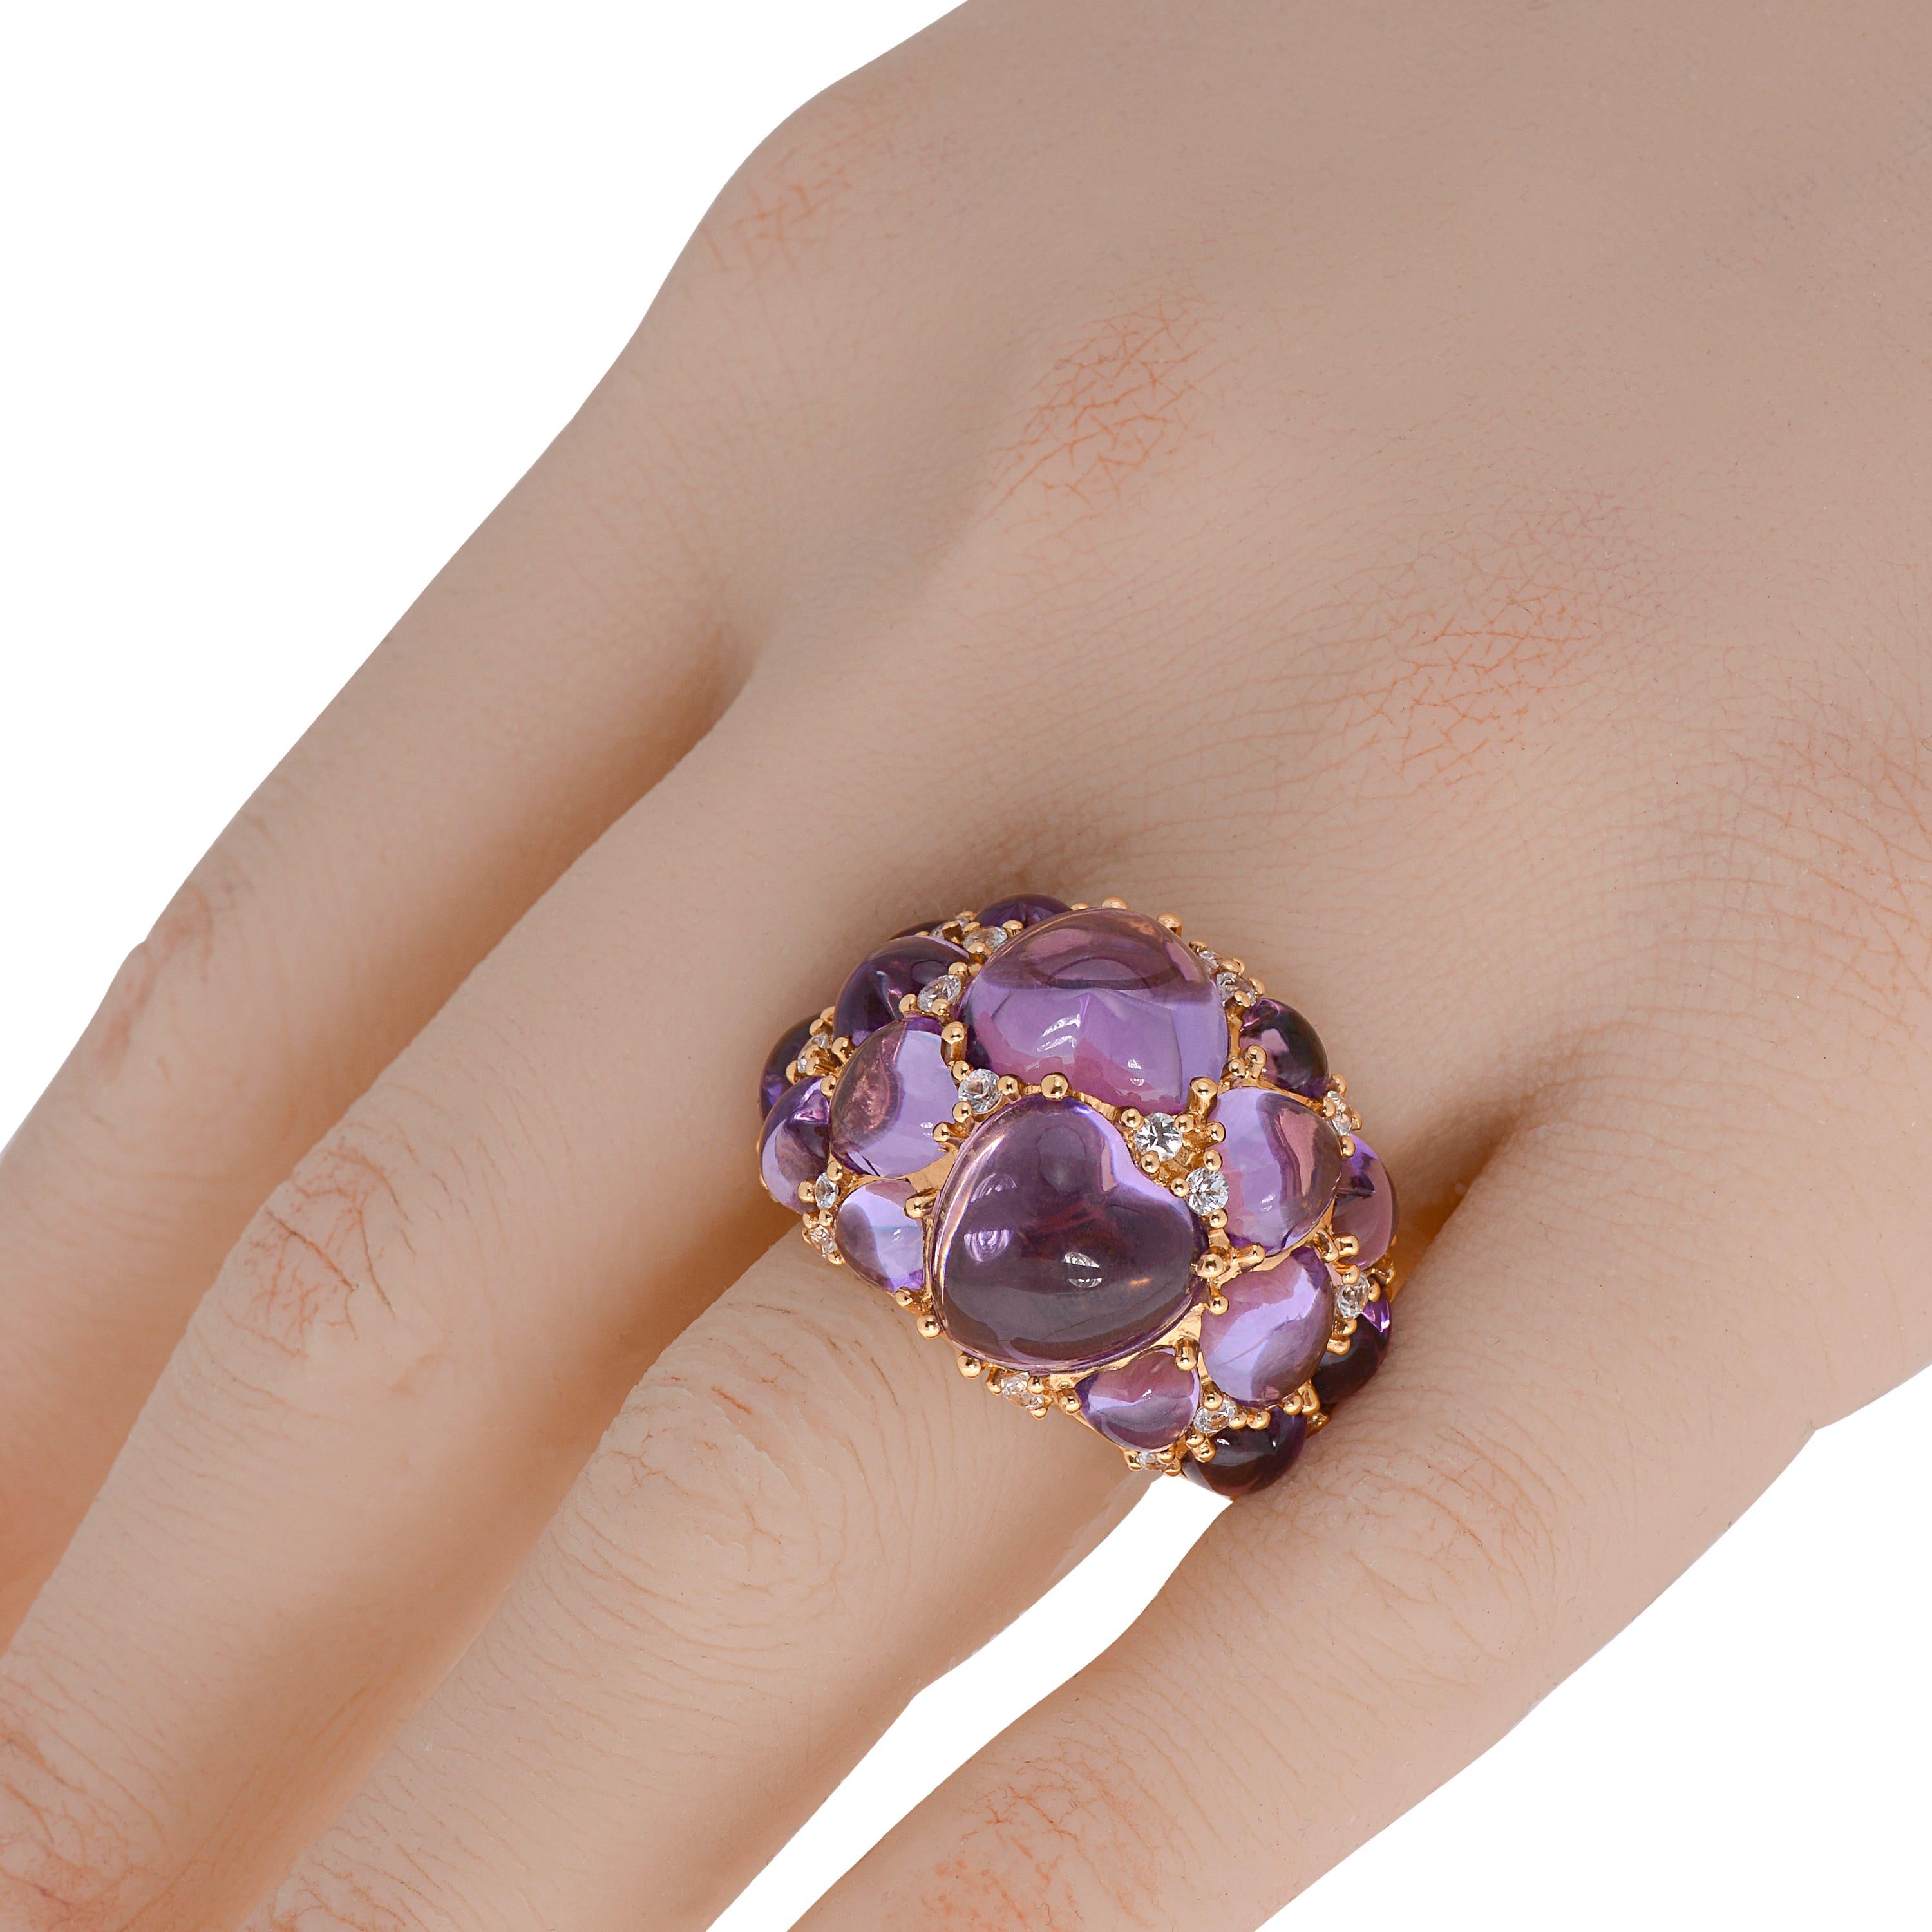 This show-stopping Mimi Milano 18K rose gold cocktail ring features 21.15ct. tw. cabochon amethyst hearts with shimmering 0.75ct. tw. prong set white sapphires. The ring size is 6.25. The band width is 6mm. The weight is 18g.
